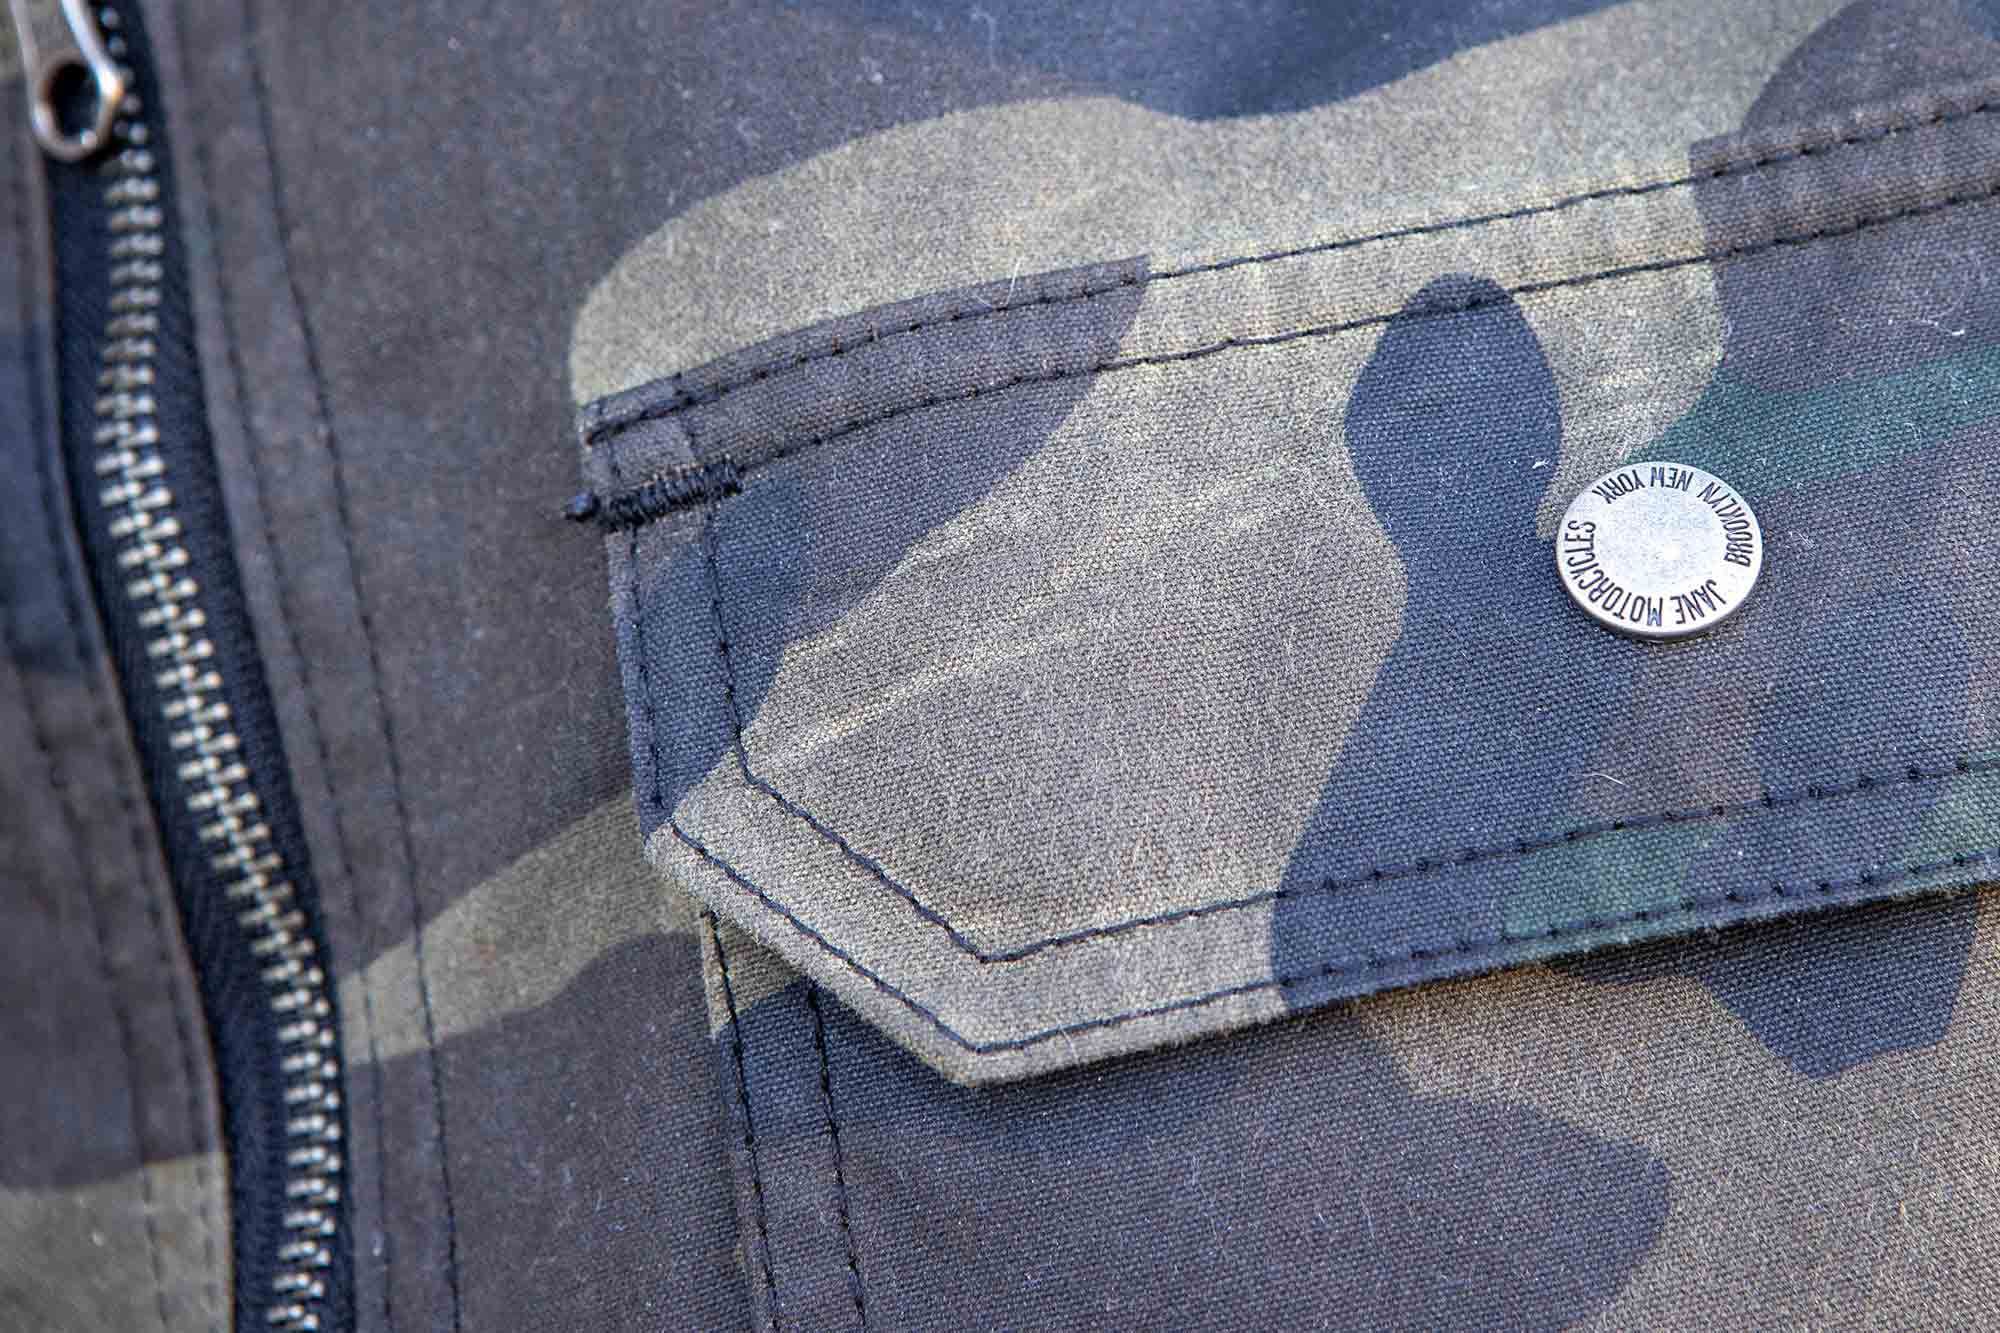 Stress points, like the corner of the breast pocket seen here, are reinforced with added stitching for strength and reliability.